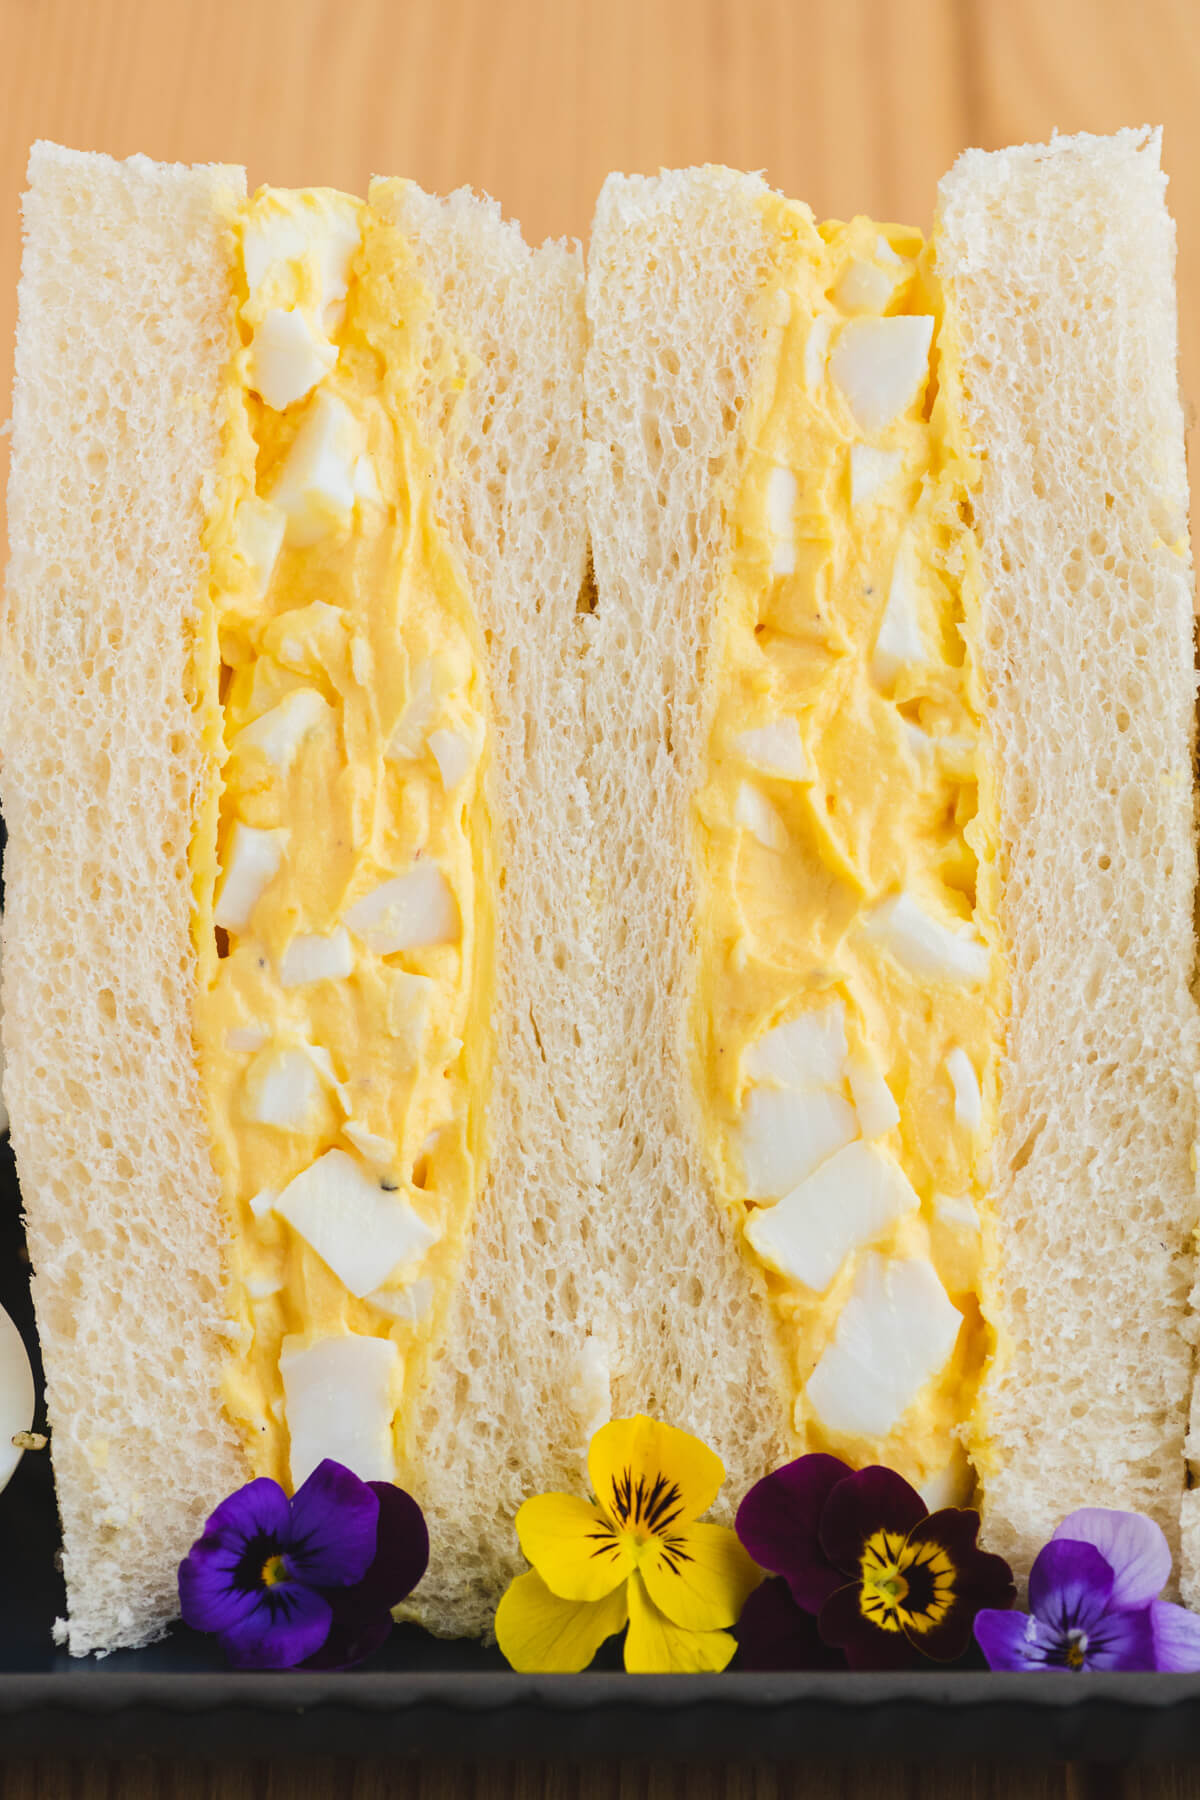 Two rich yellow egg salad sandwiches on fluffy white crust less bread on a plate garnished with edible flowers.